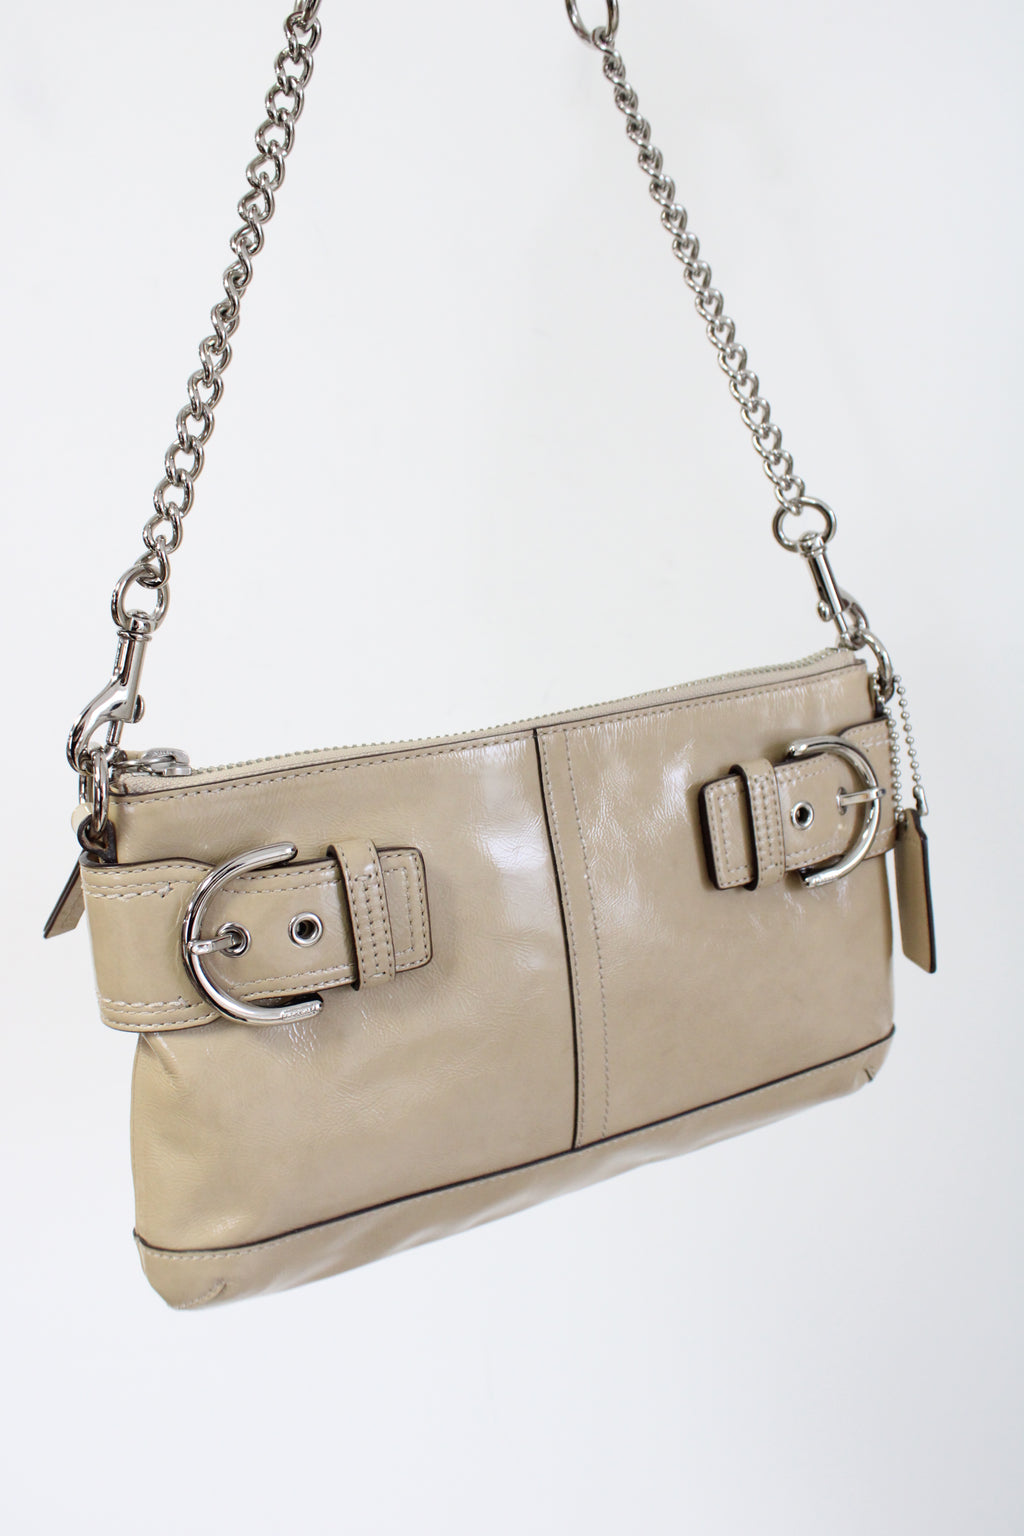 Coach Soho Patent Leather Silver Chain Handle Buckle Bag